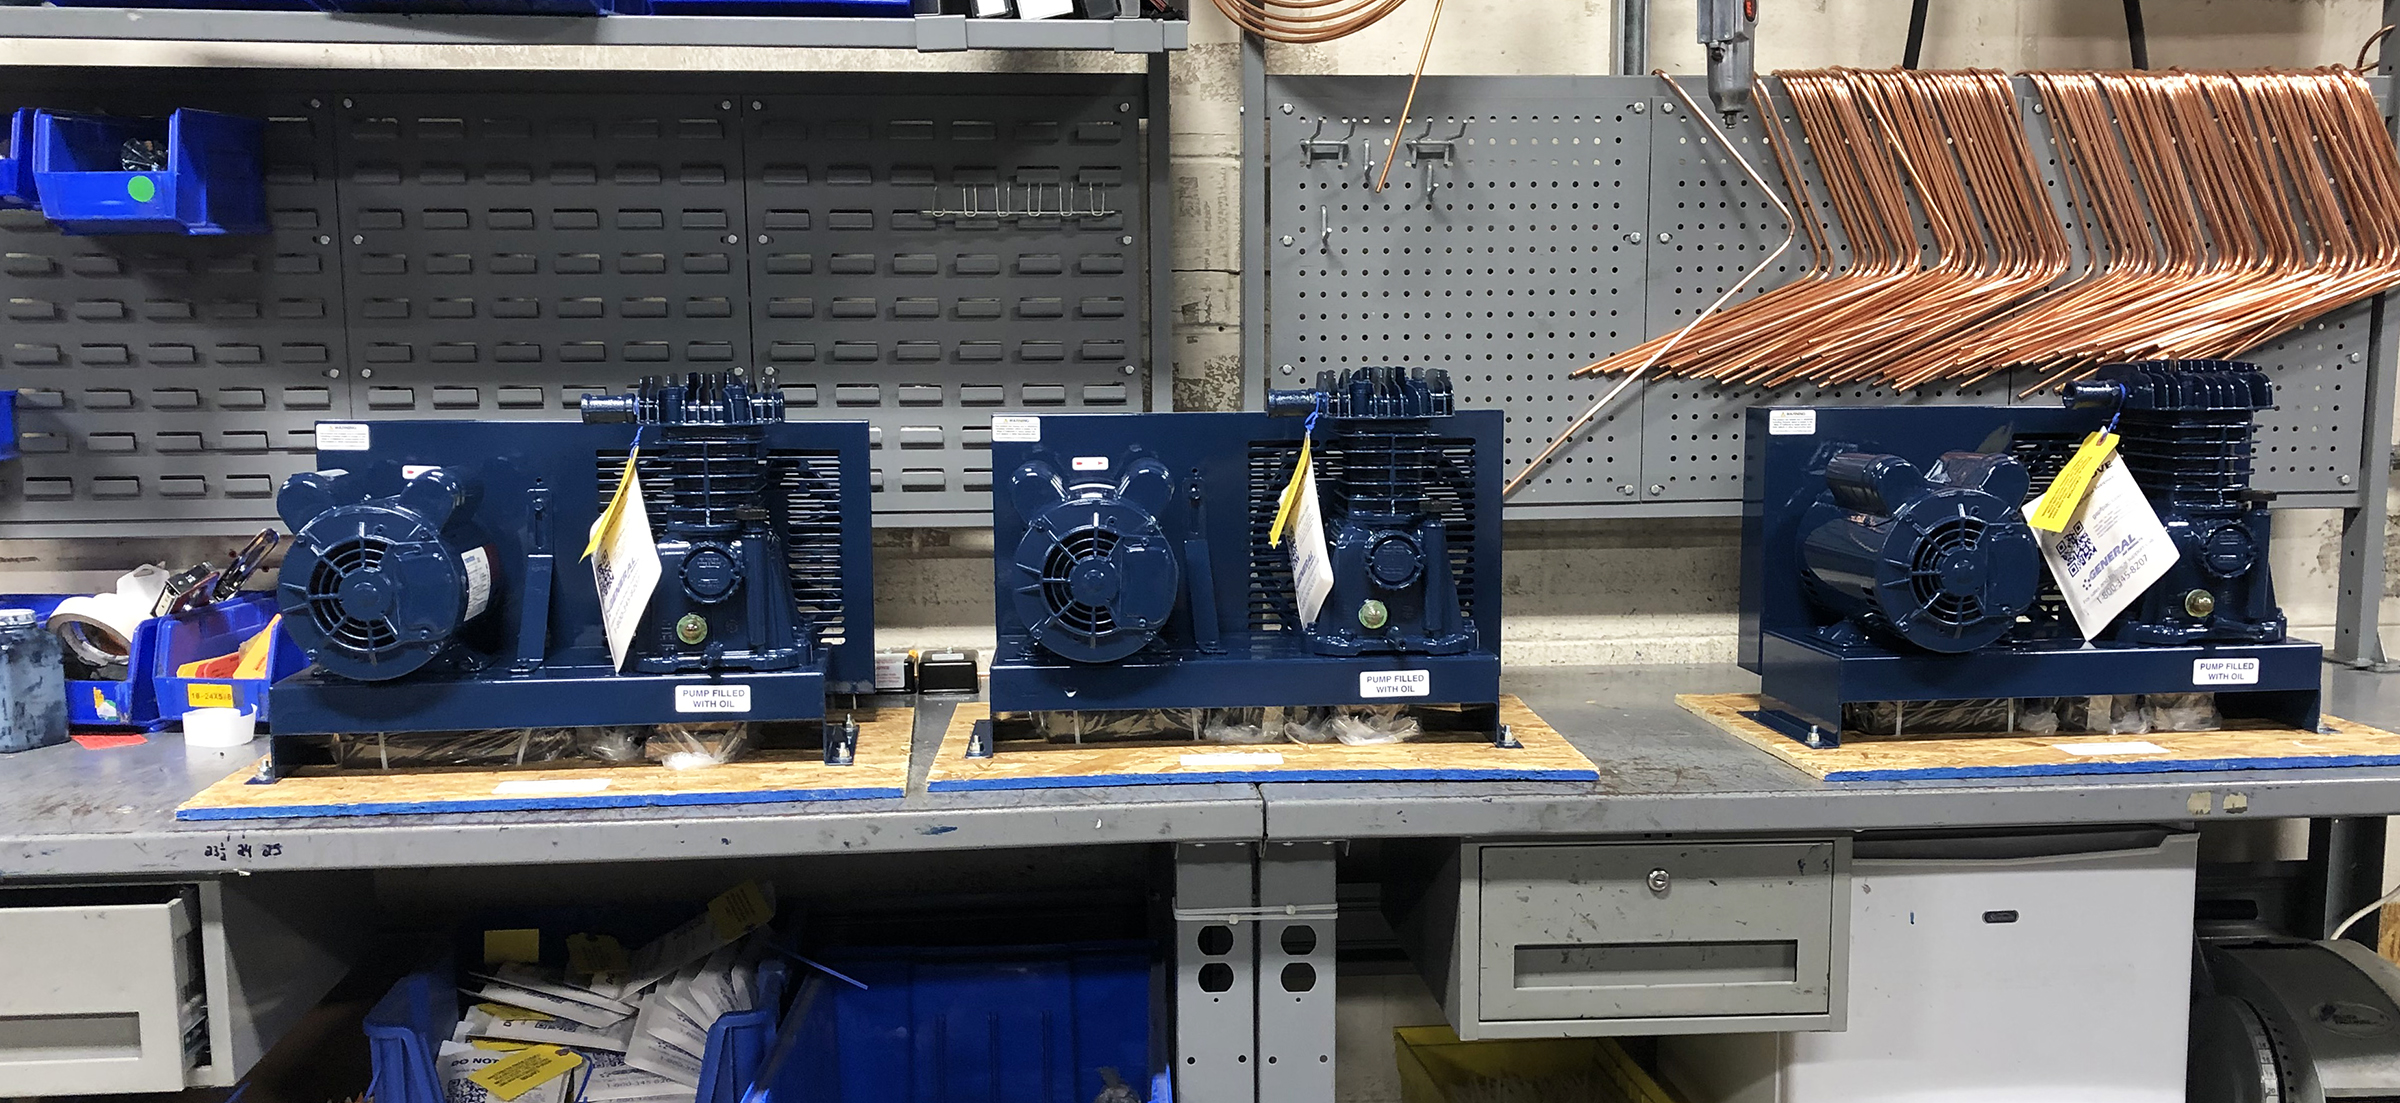 three blue compressors are lined up on a workbench